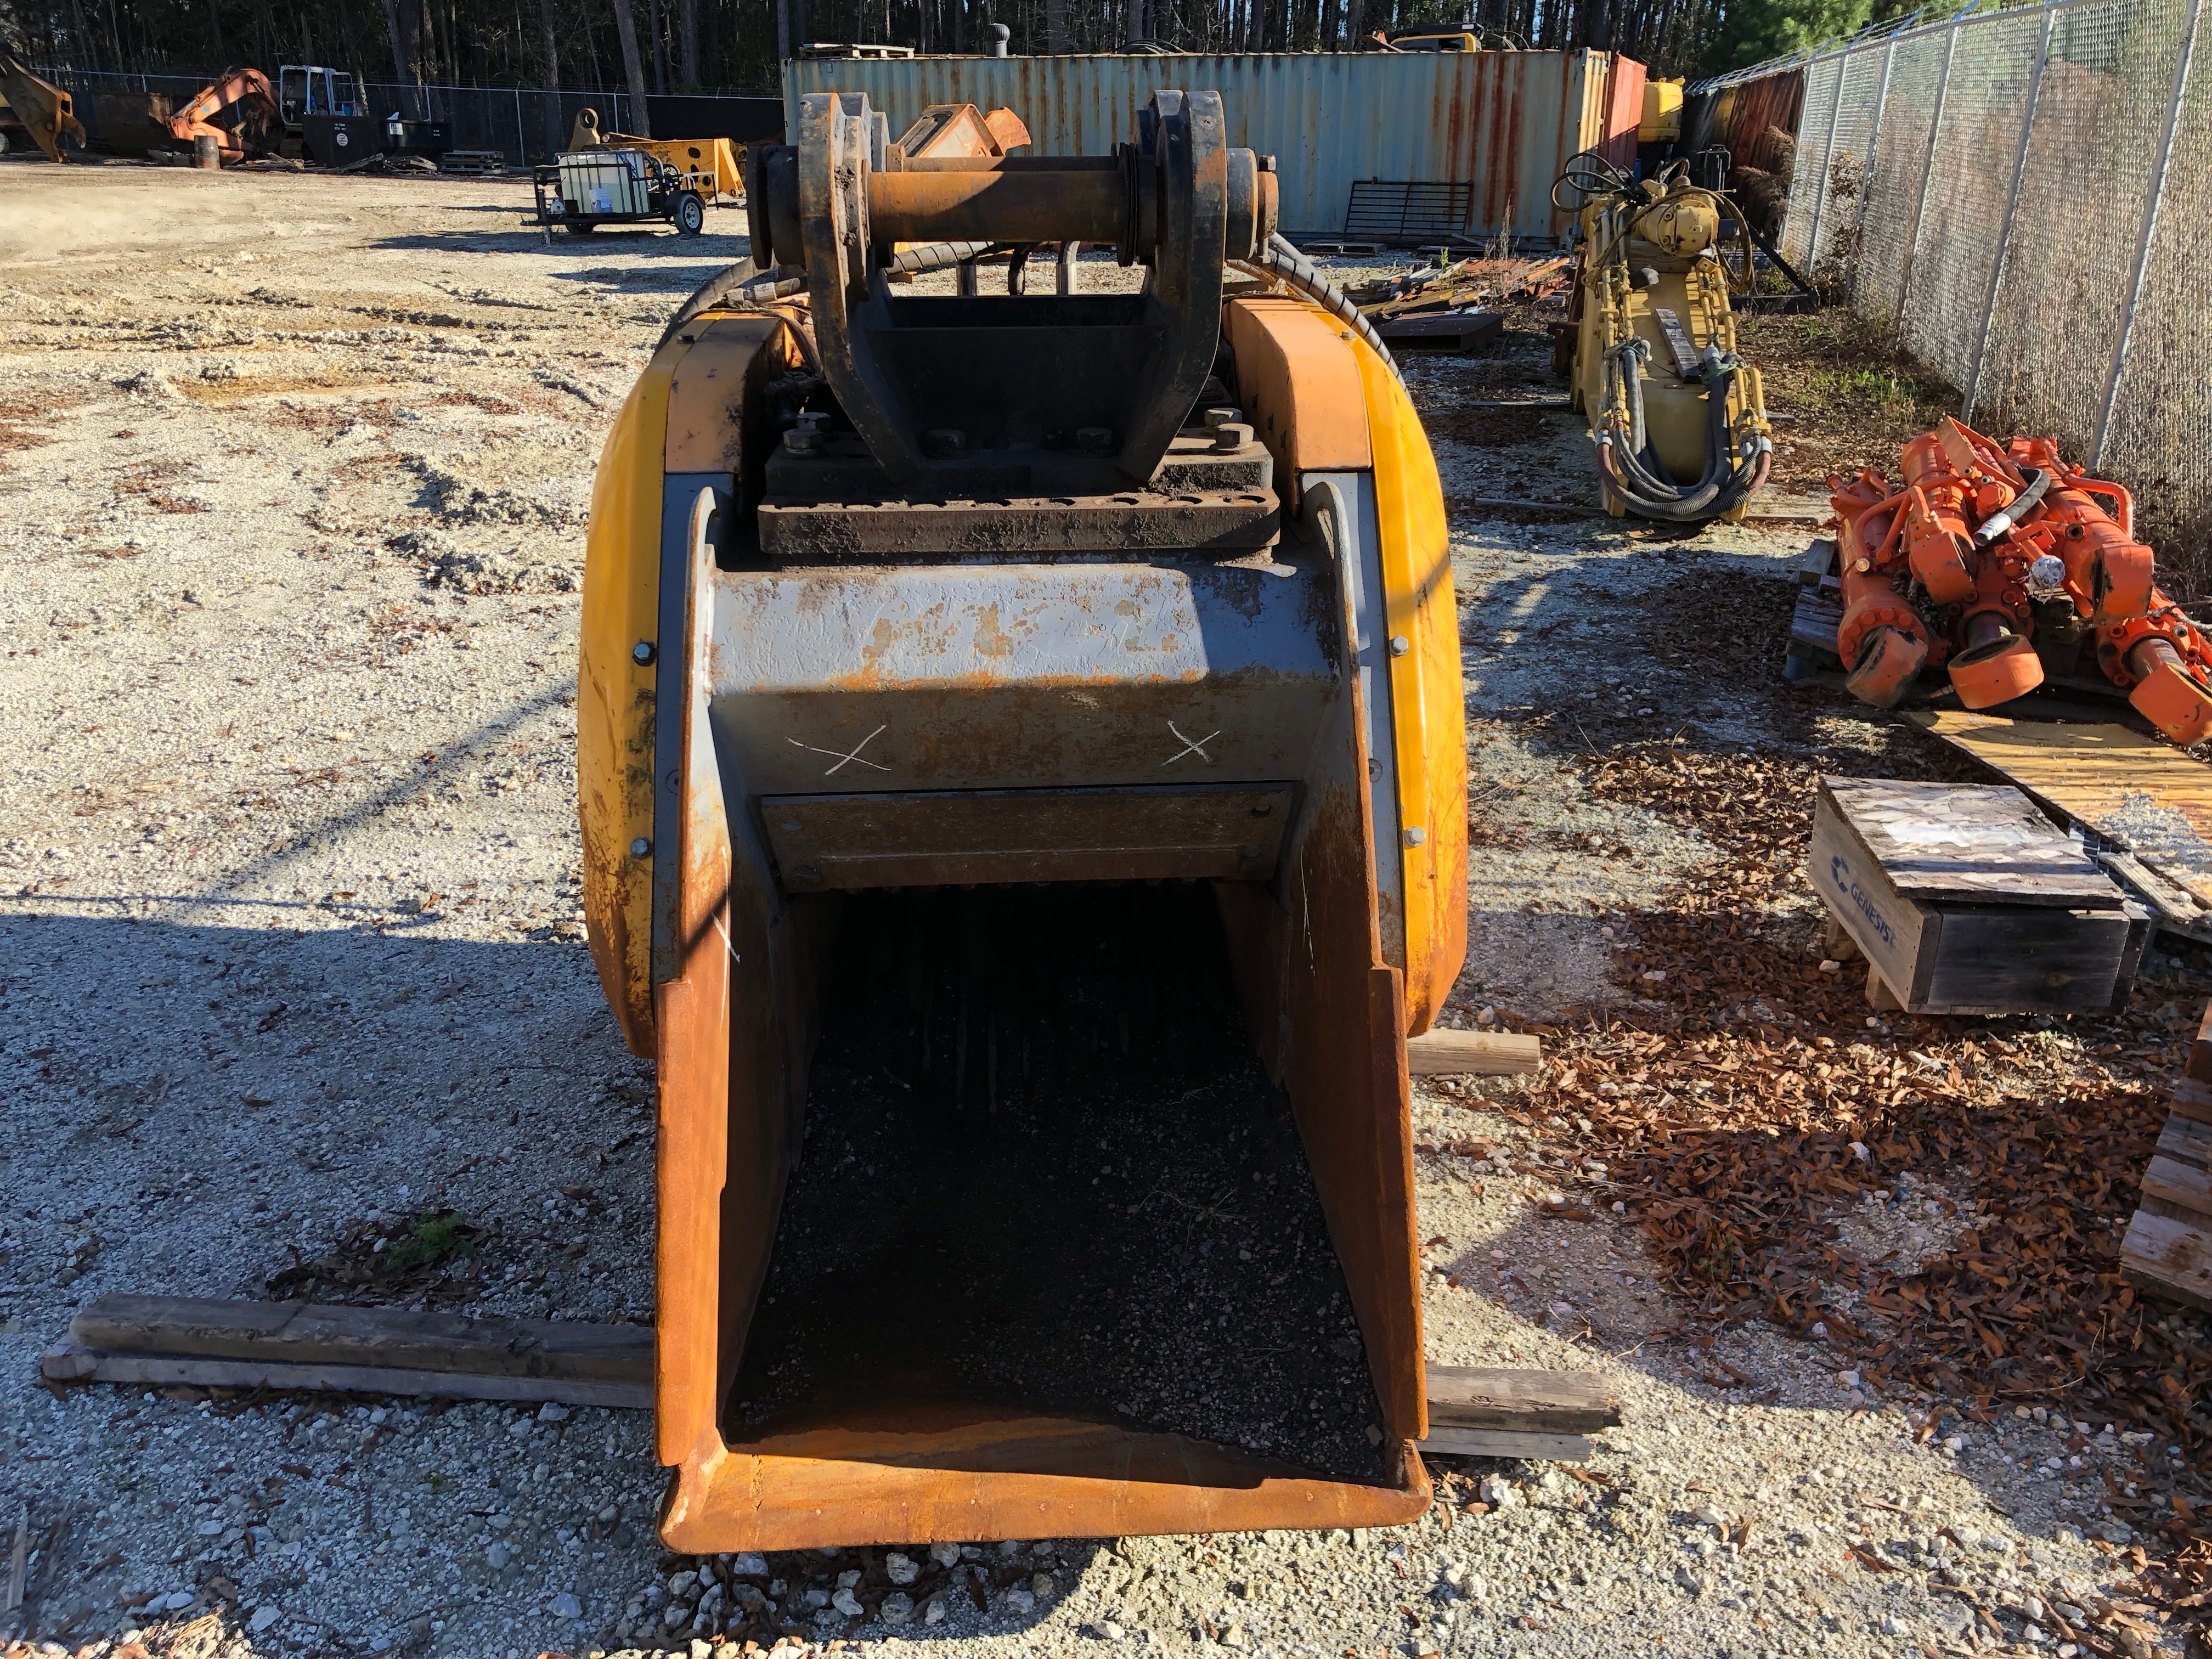 Used  Hartl HBC750 For Sale